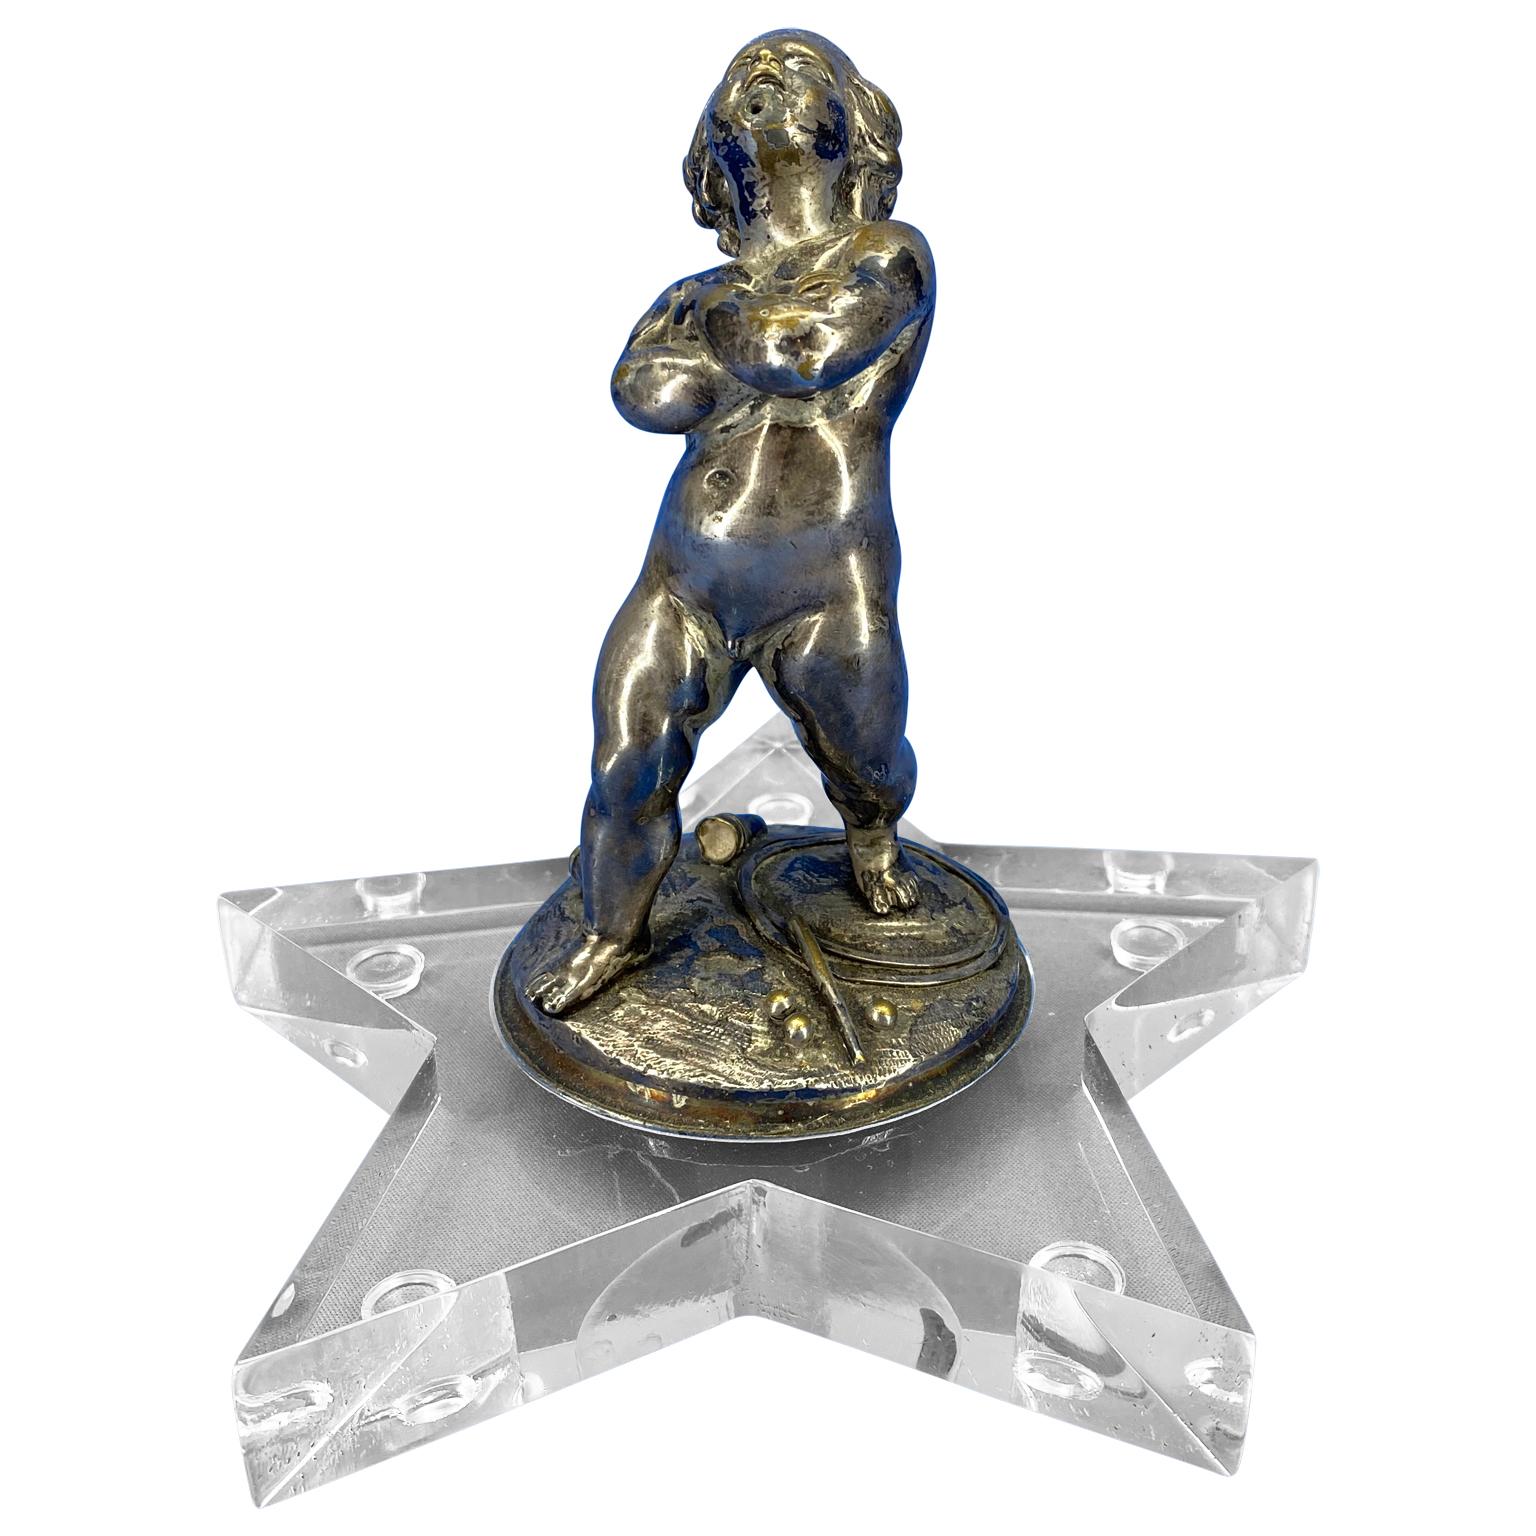 Early 19th Century silver plated putti on a modern star shaped Lucite base.